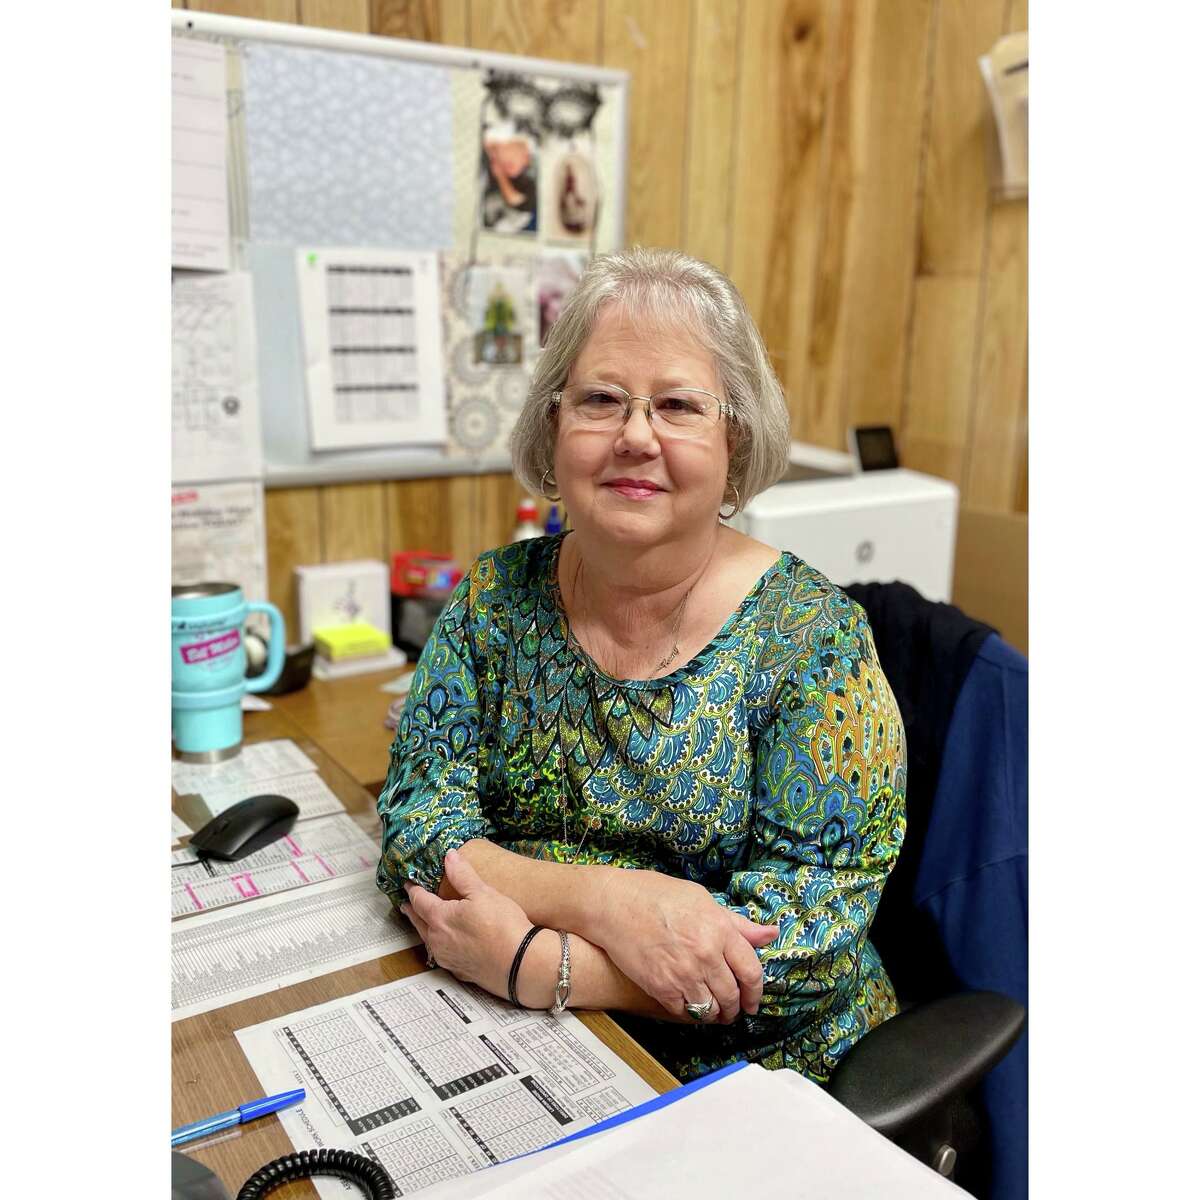 Holly Hay, 67, has worked for Bill Miller Bar-B-Q since she was 19. She retired this month after nearly 50 years at the restaurant chain.